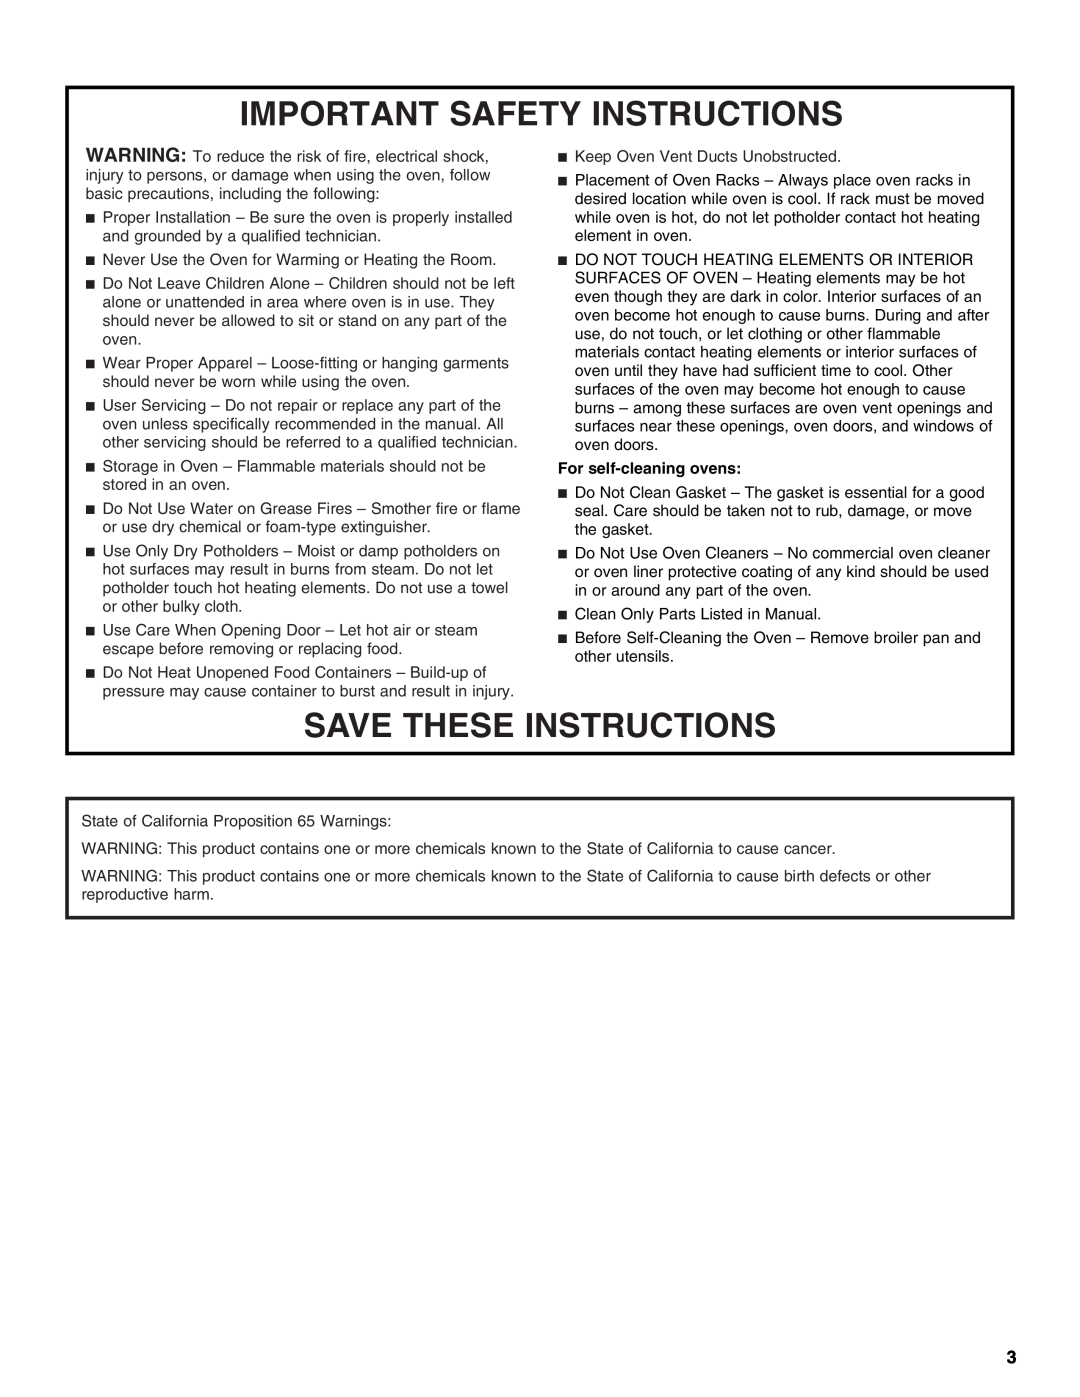 Whirlpool WOC54EC7AS, WOC54EC0AW manual Important Safety Instructions, Save These Instructions, For self-cleaning ovens 